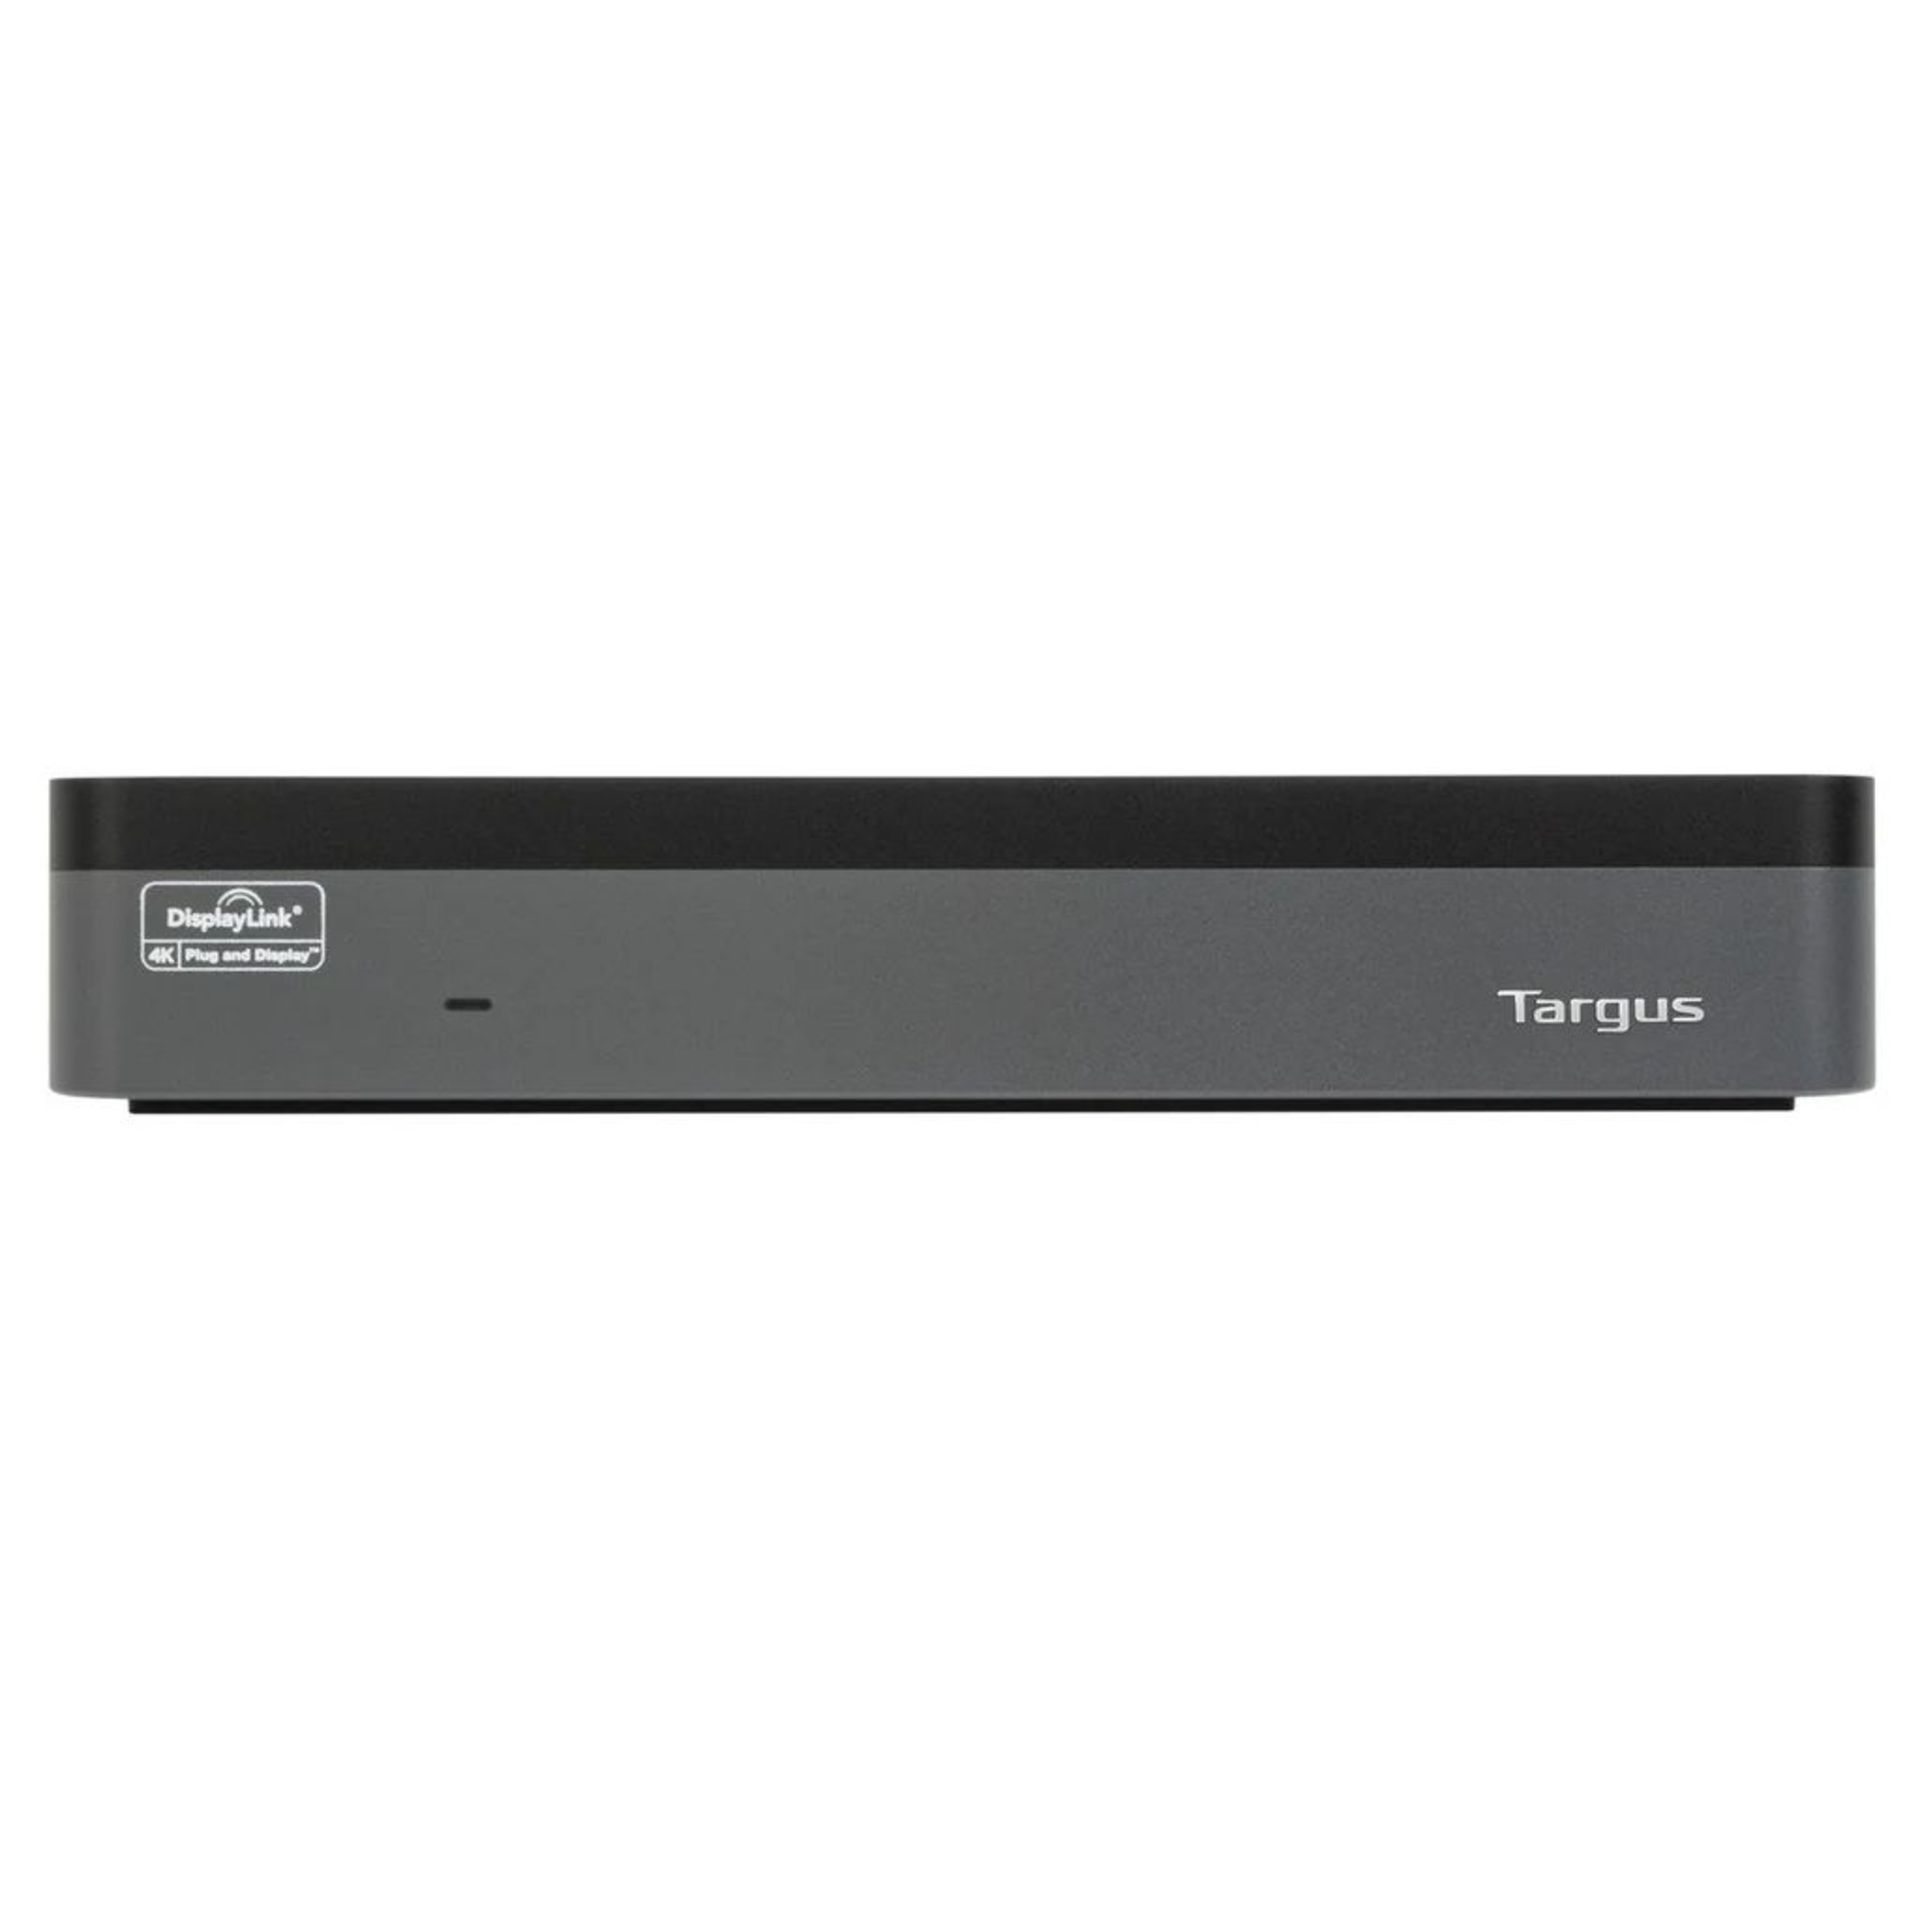 NEW & BOXED TARGUS Four Head 4K Dock With 100w Docking Station (DOCK570EUZ-82). RRP £351.89. Boost - Image 2 of 8